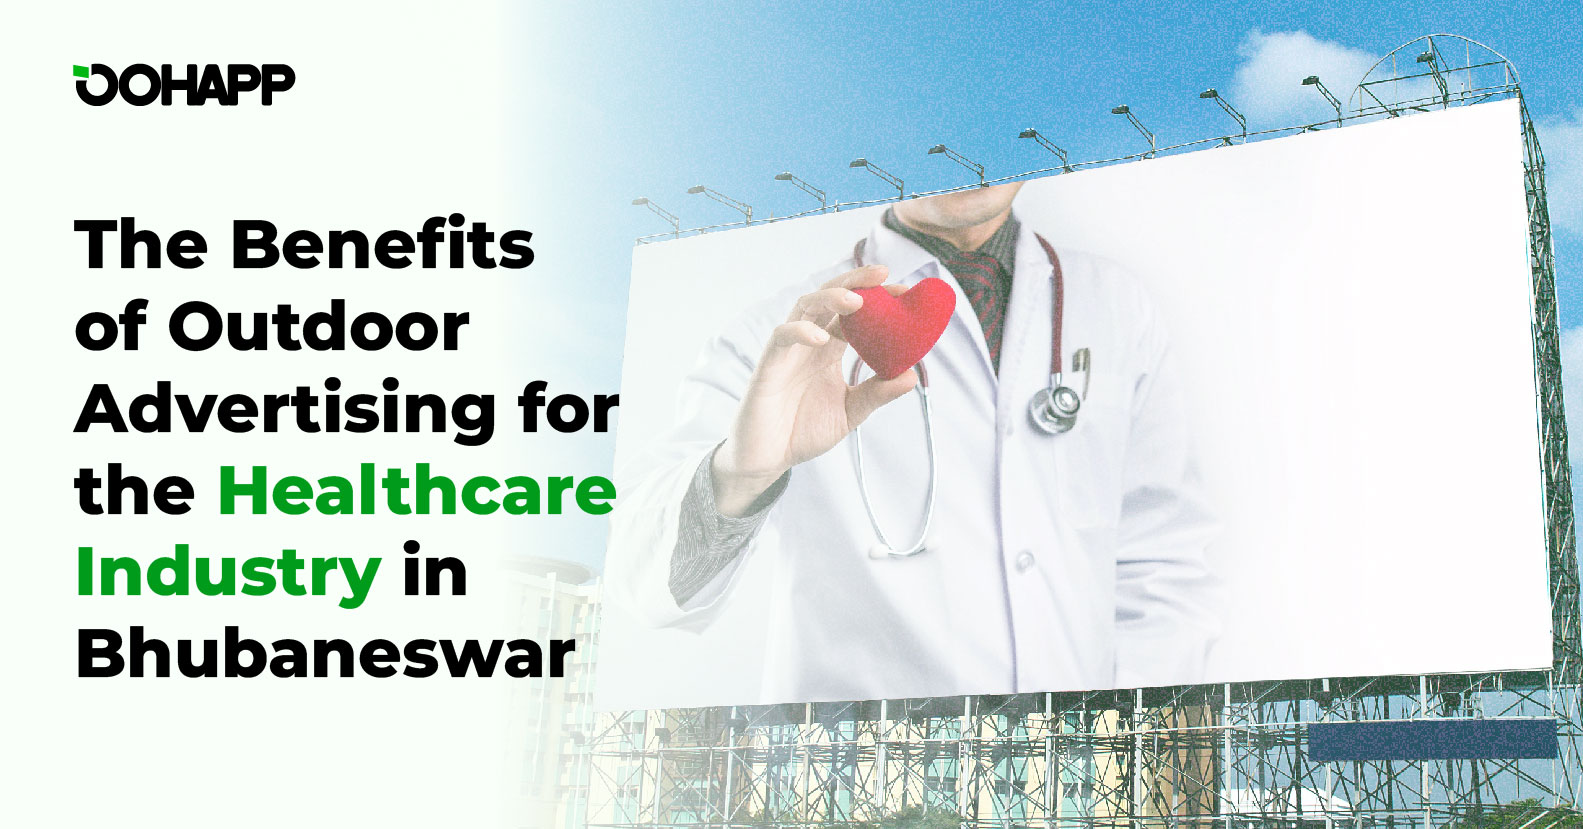 The Benefits of Outdoor Advertising for the Healthcare Industry in Bhubaneswar